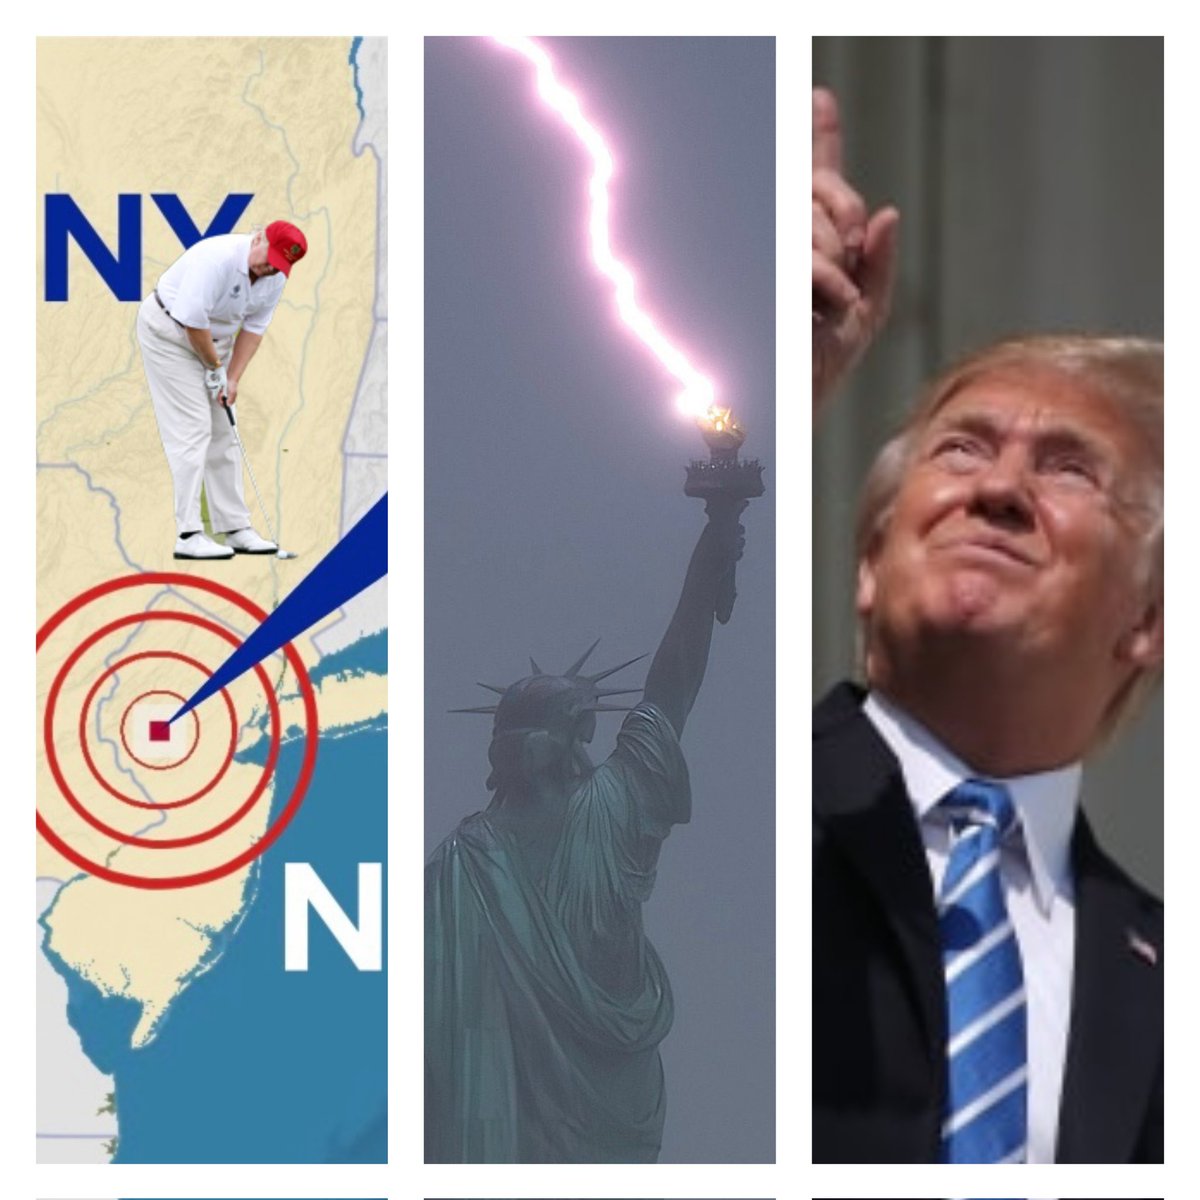 Now I'm not normally one of those Doomsday people, but with an Earthquake epicenter at Bedminster Golf Club, Lightning striking the Statue of Liberty, and the upcoming Eclipse... God is obviously very angry Donald Trump is not in jail.